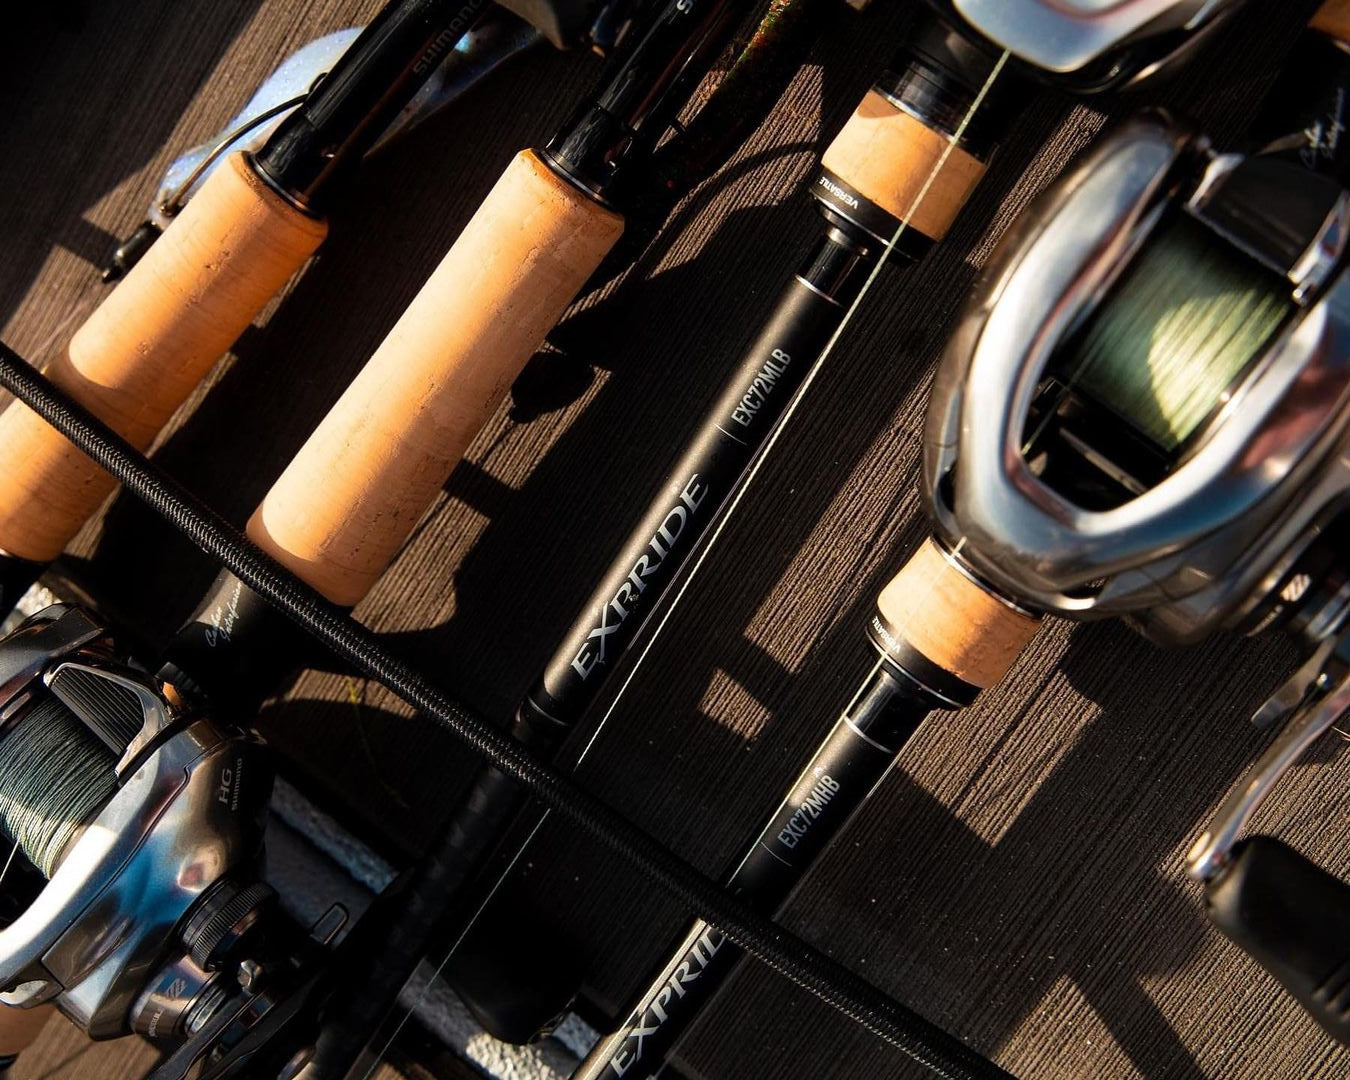 Fishing Rods - Casting, Spinning, Centerpin, Fly, Ice, Trolling